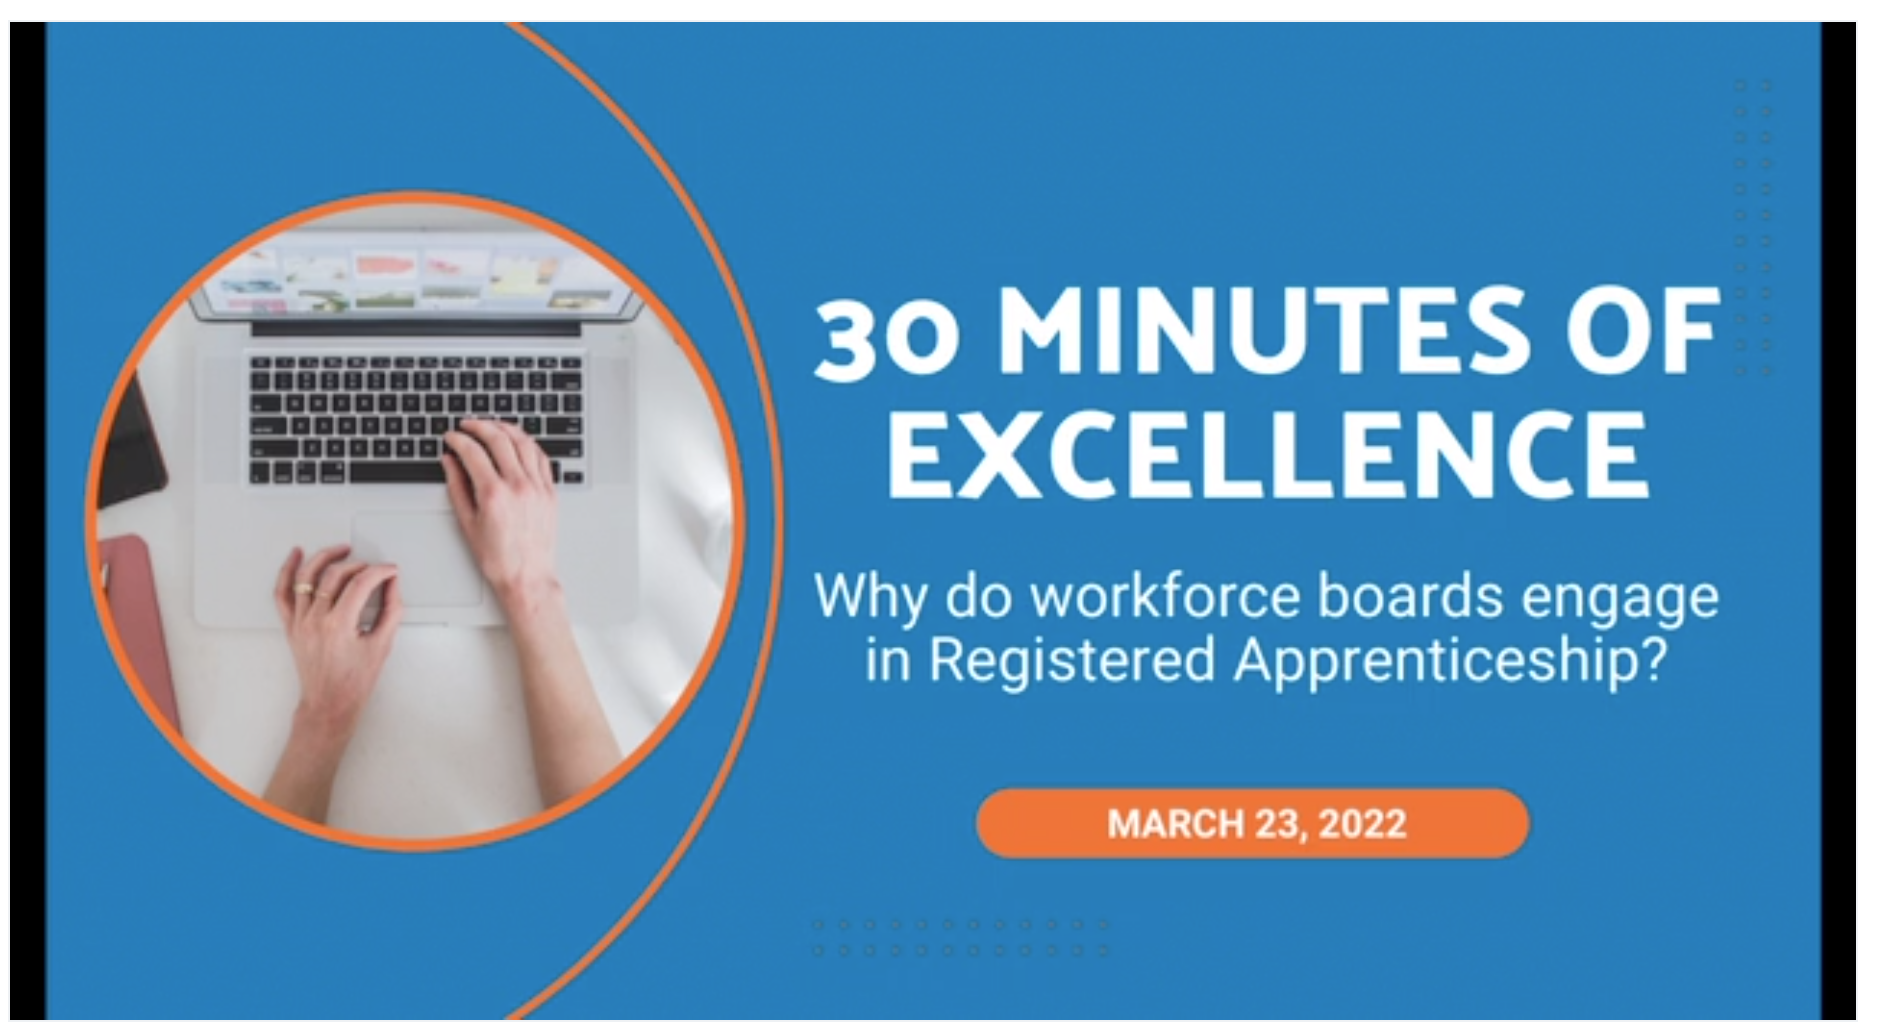 30 Minutes of Excellence, March 23, 2022